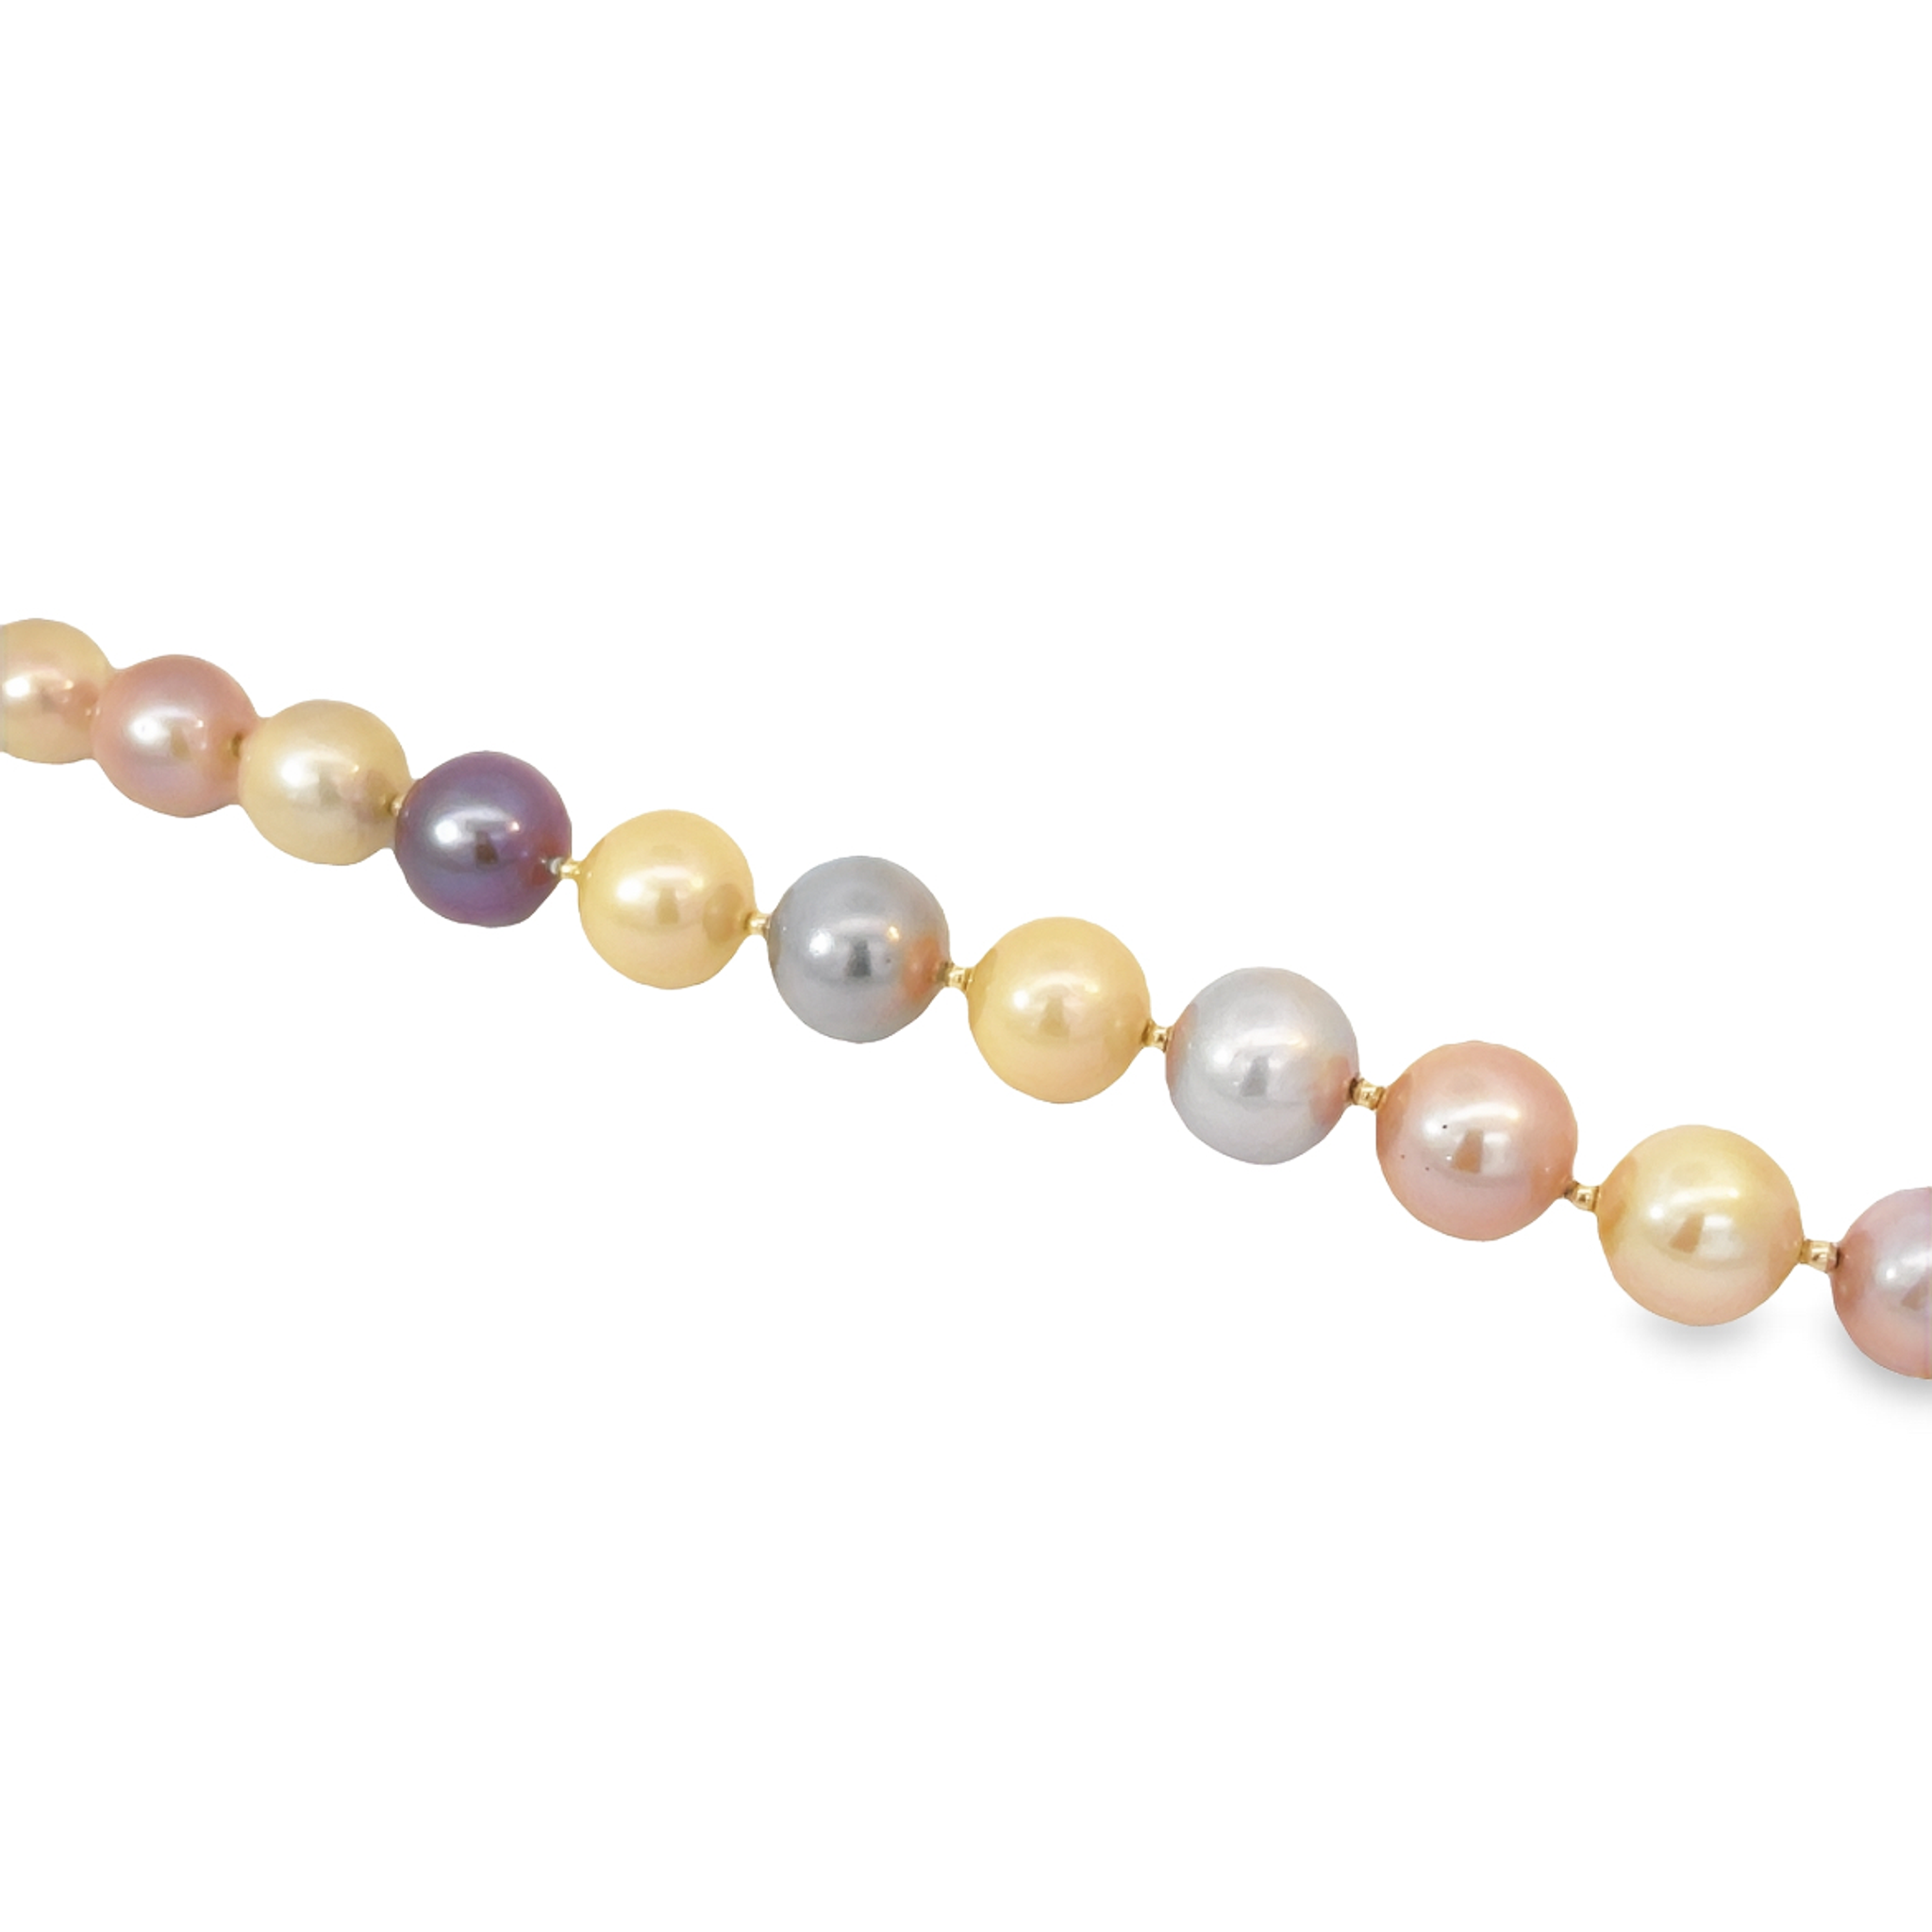 This bewitching cultured pearl yellow gold bead ring is the perfect way to add a hint of whimsical luxury to any style. The 14 karat yellow gold bead setting and 7 mm pearl make a chic and timeless statement. Treat yourself or a loved one to this divinely elegant gift.